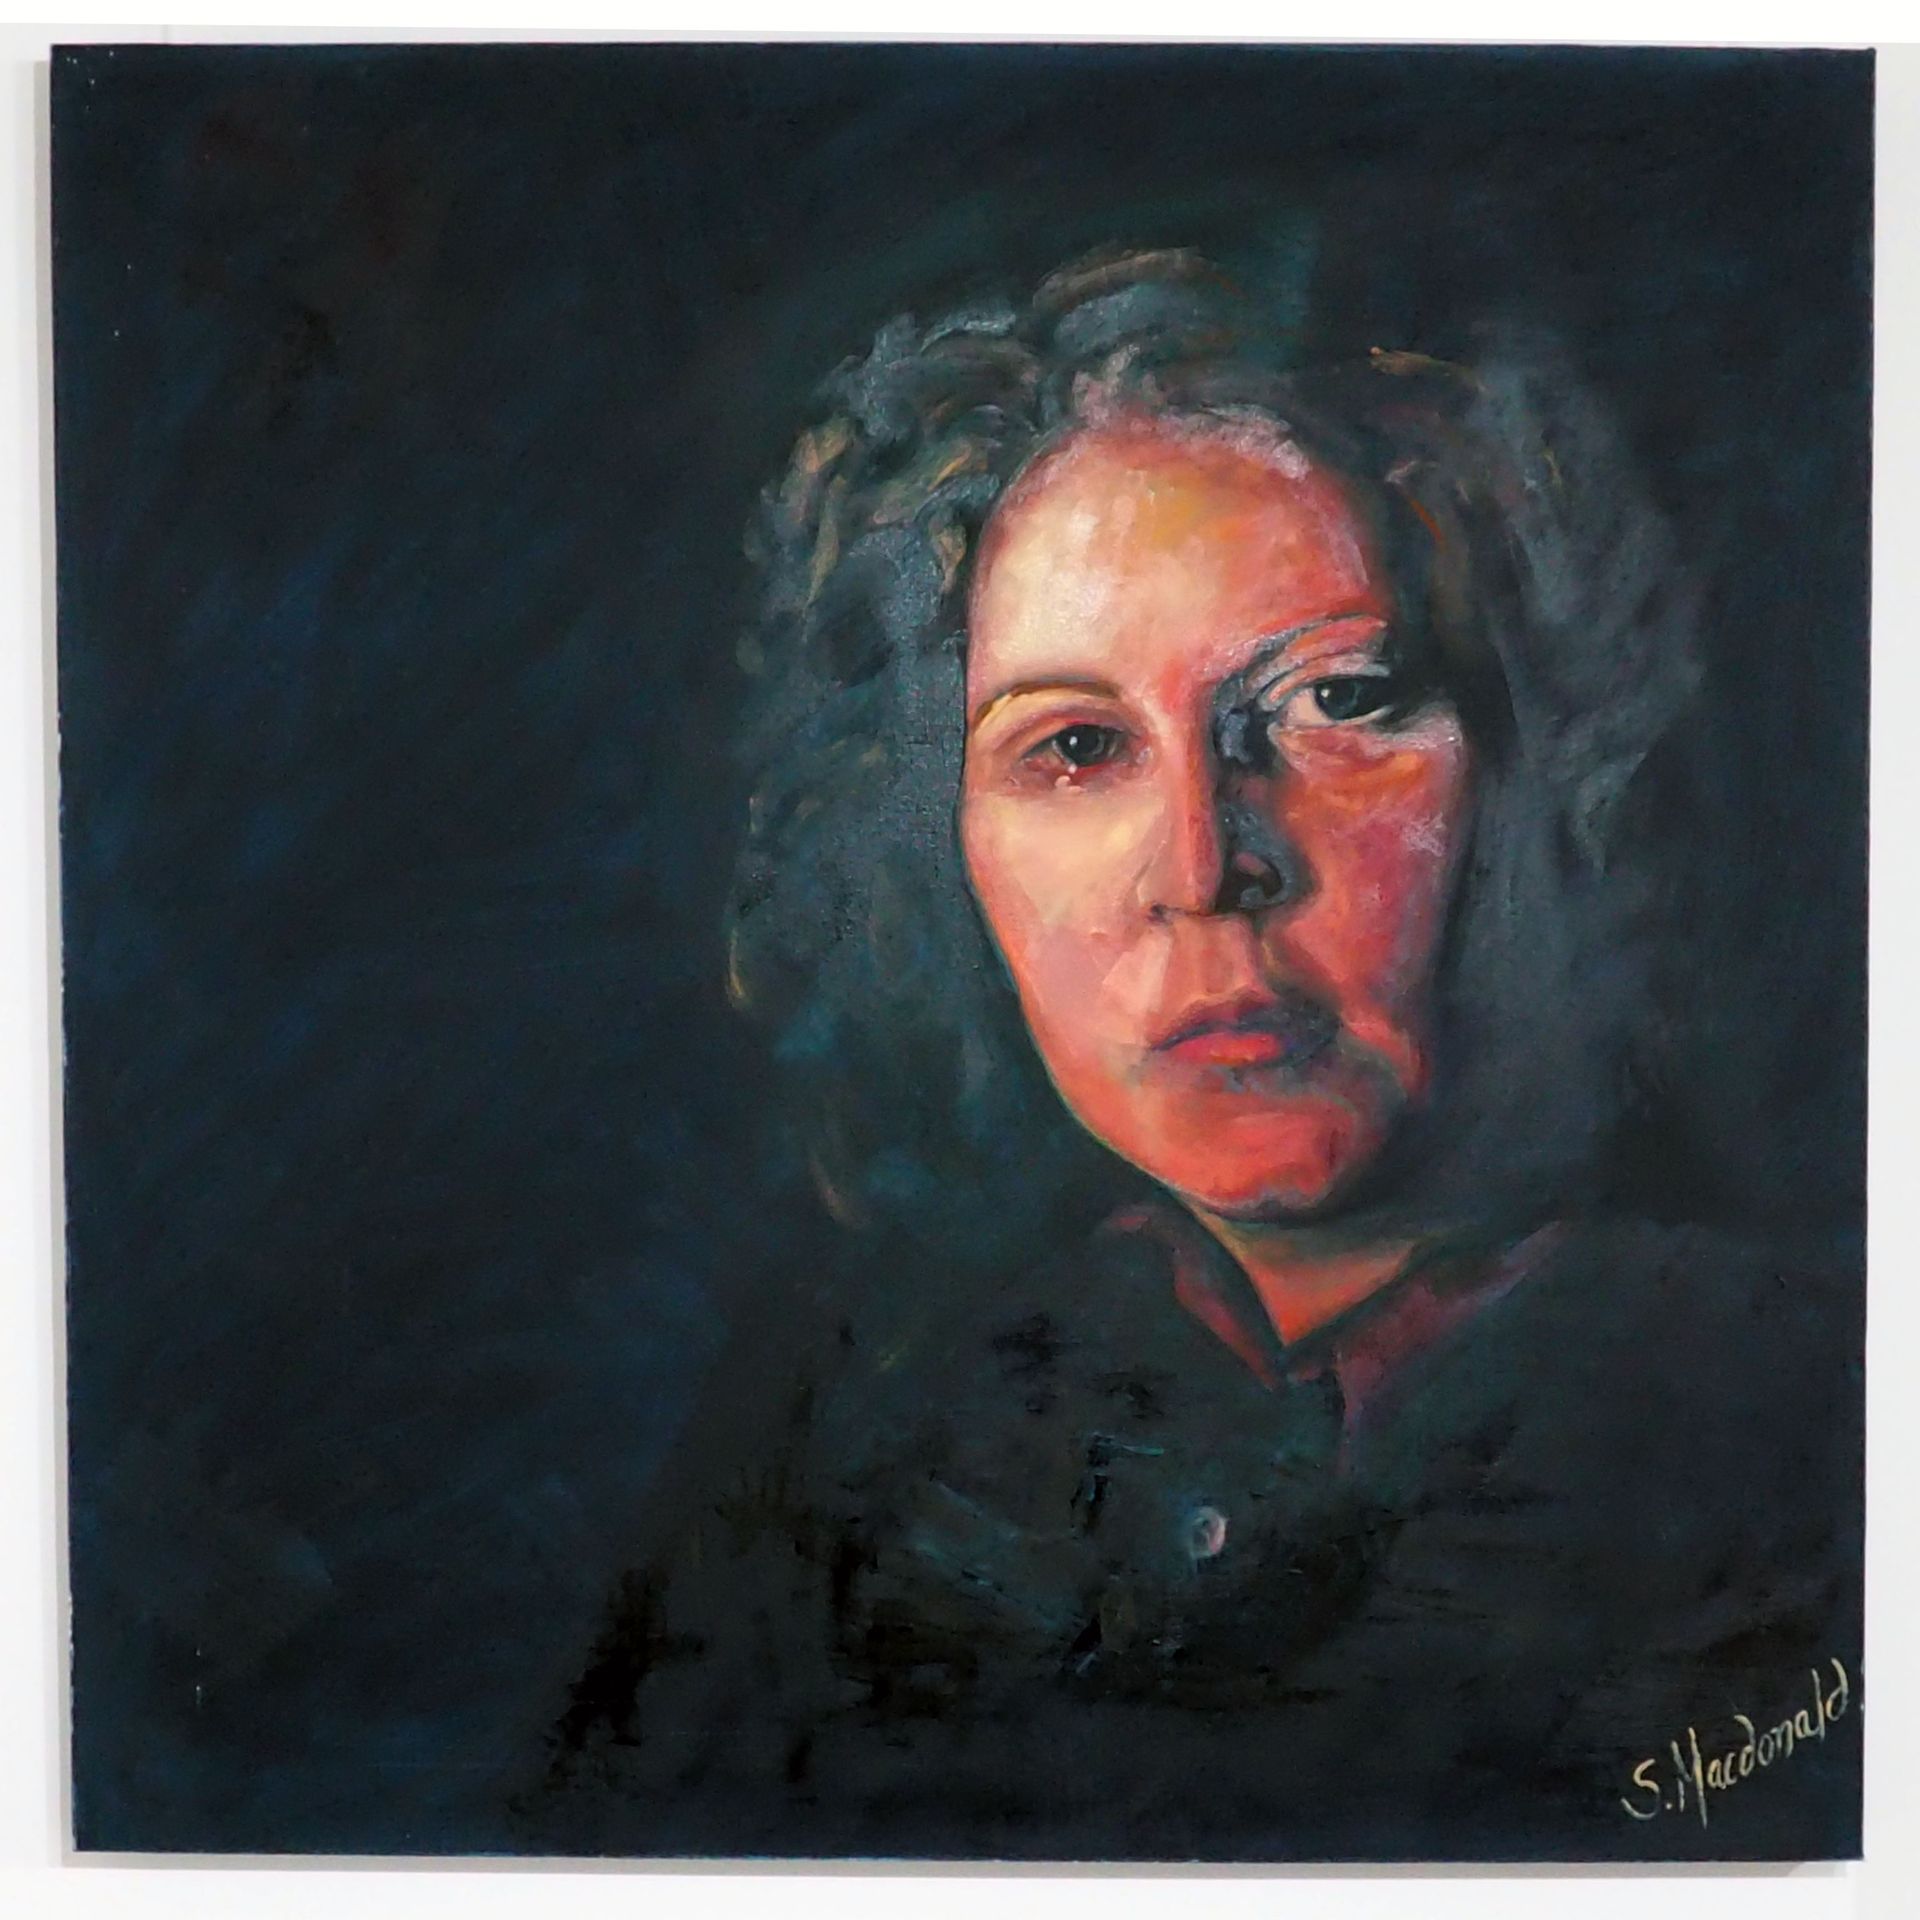 On a large dark square canvas emerges a warm sad face of the artist herself - Sarah Macdonald